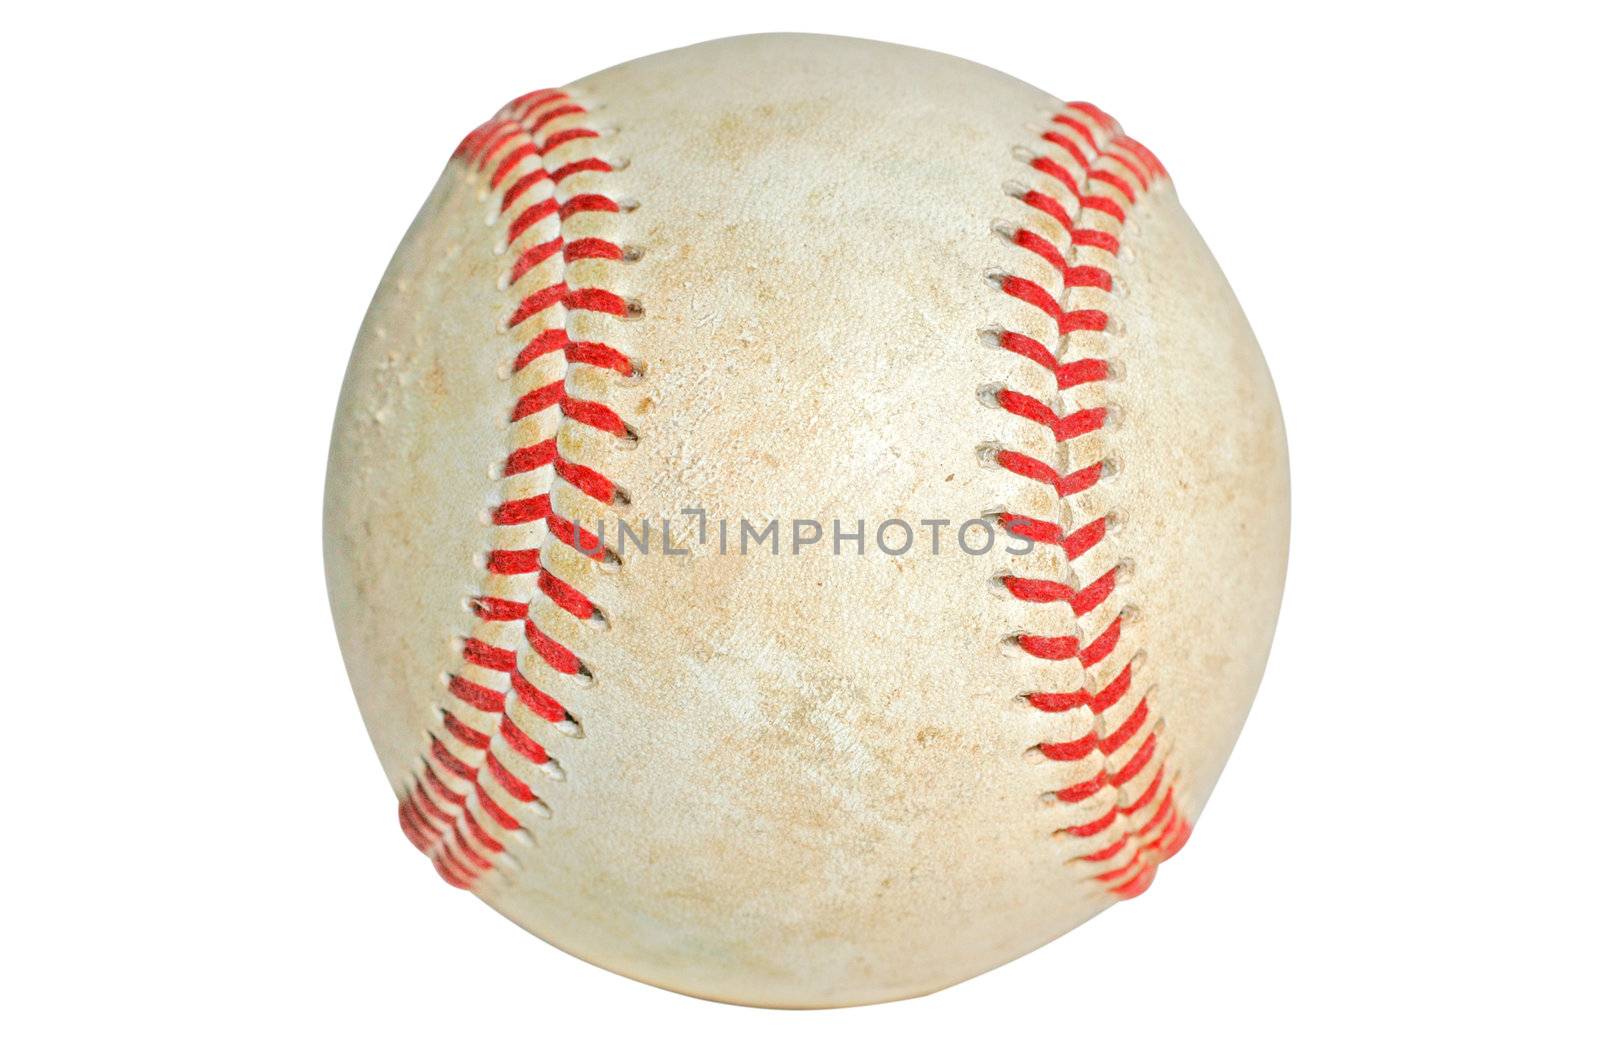 Old baseball with clipping path.